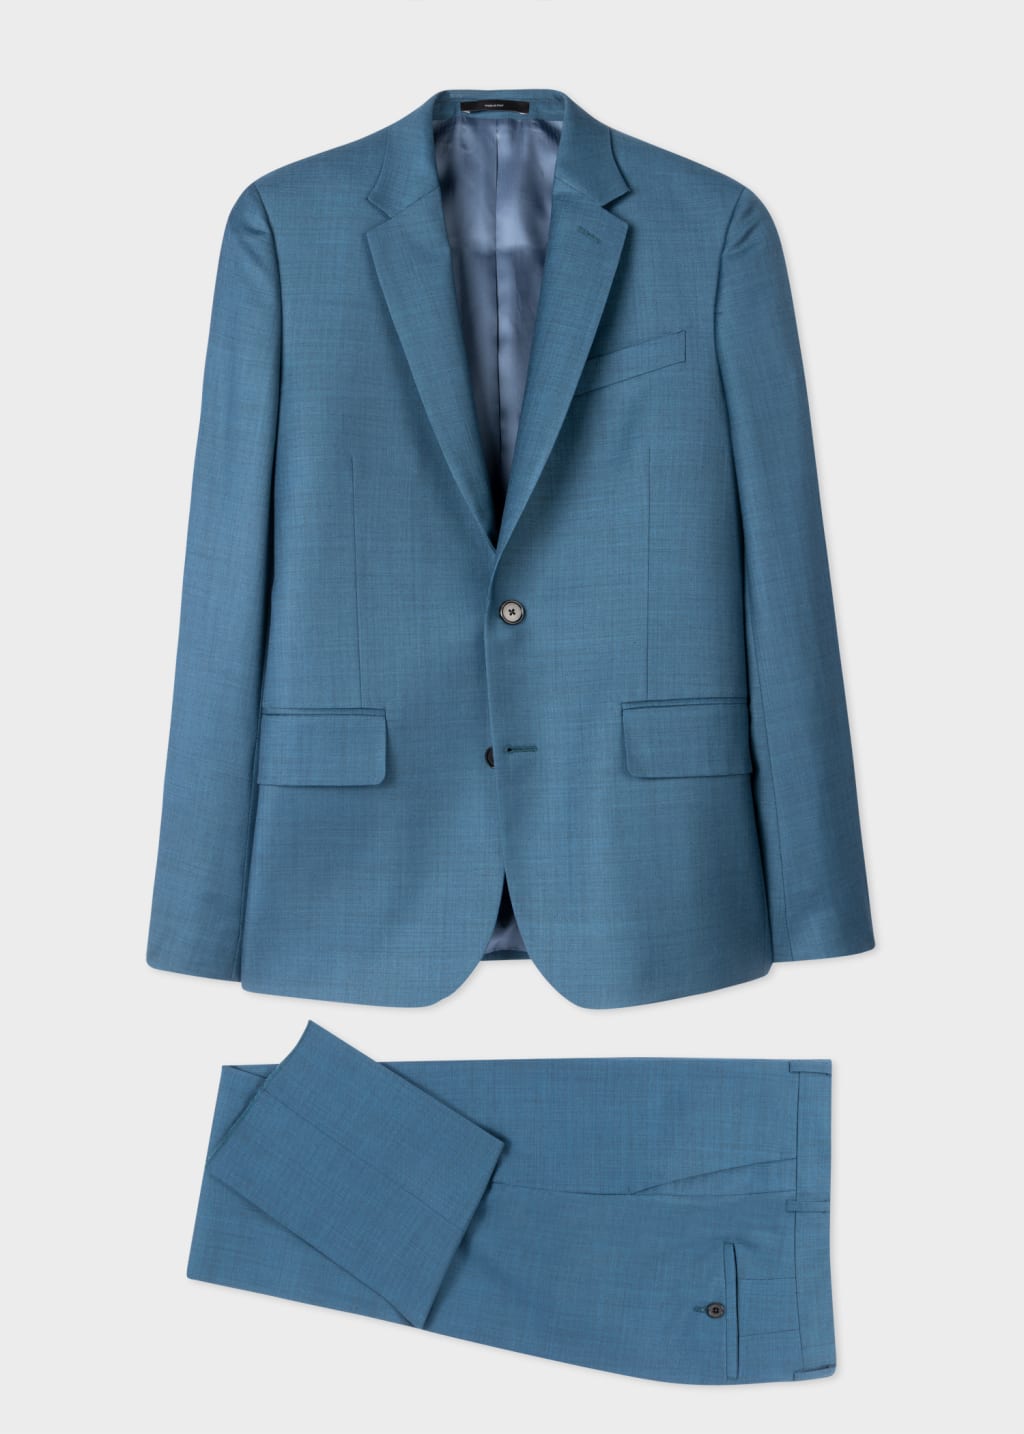 Front View - The Soho - Tailored-Fit Teal Sharkskin Wool Suit Paul Smith